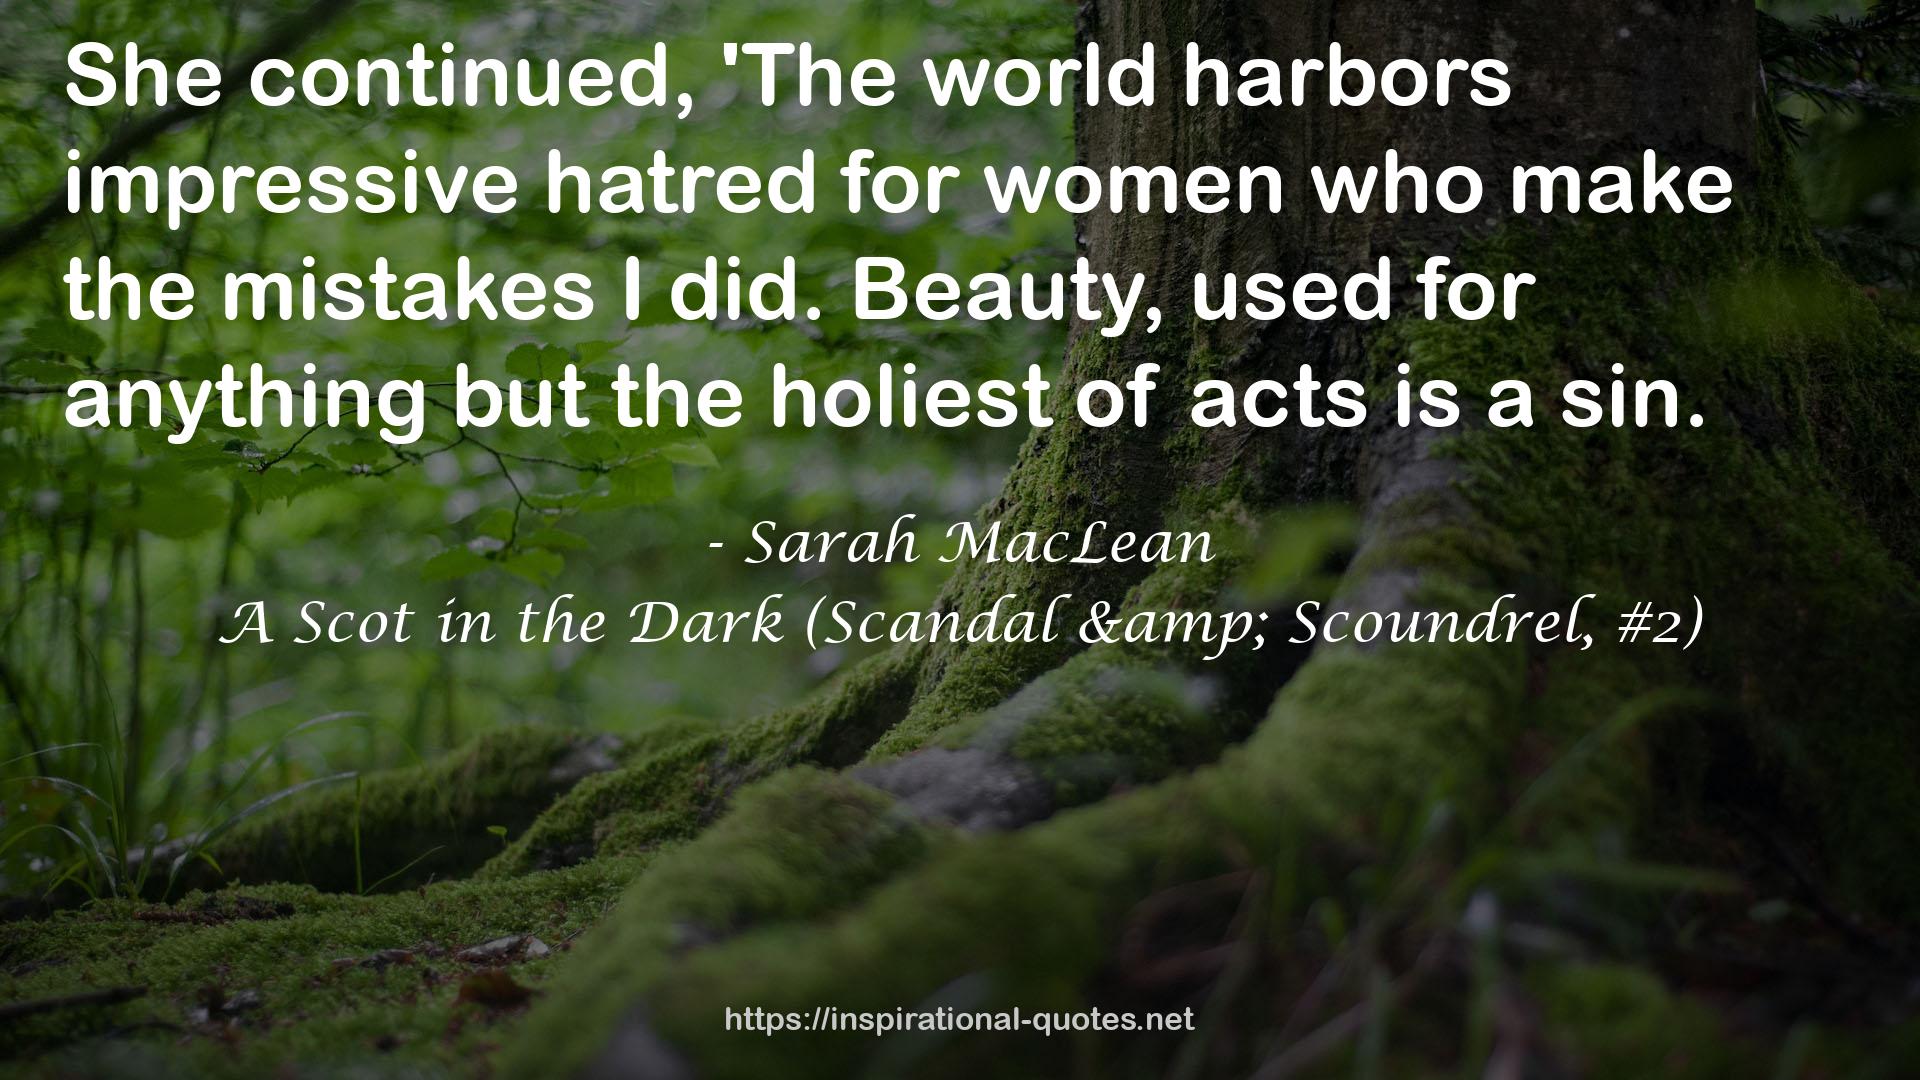 A Scot in the Dark (Scandal & Scoundrel, #2) QUOTES